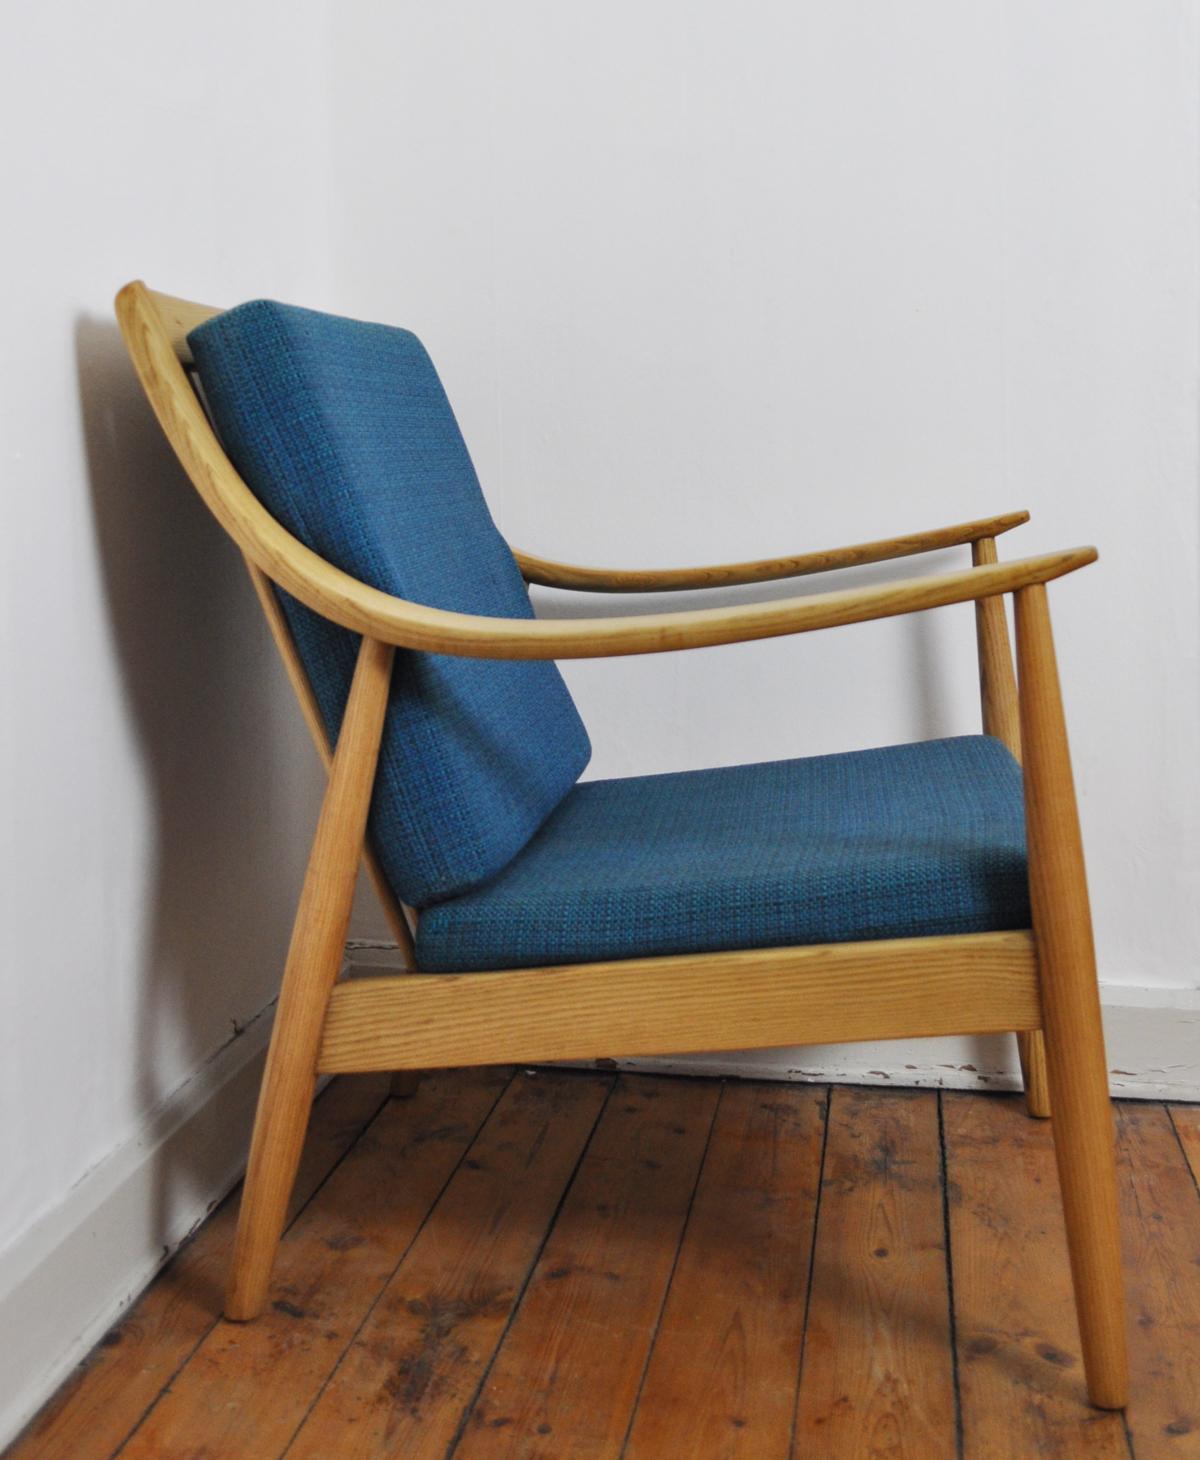 Lounge chair designed by Peter Hvidt & Orla Mølgaard-Nielsen for France & Daverkosen in Denmark in the 1950s. Frame made in elm. Backrest with seven spindles and the seat rest features vinyl-covered springs. Foam cushions upholstered in textured